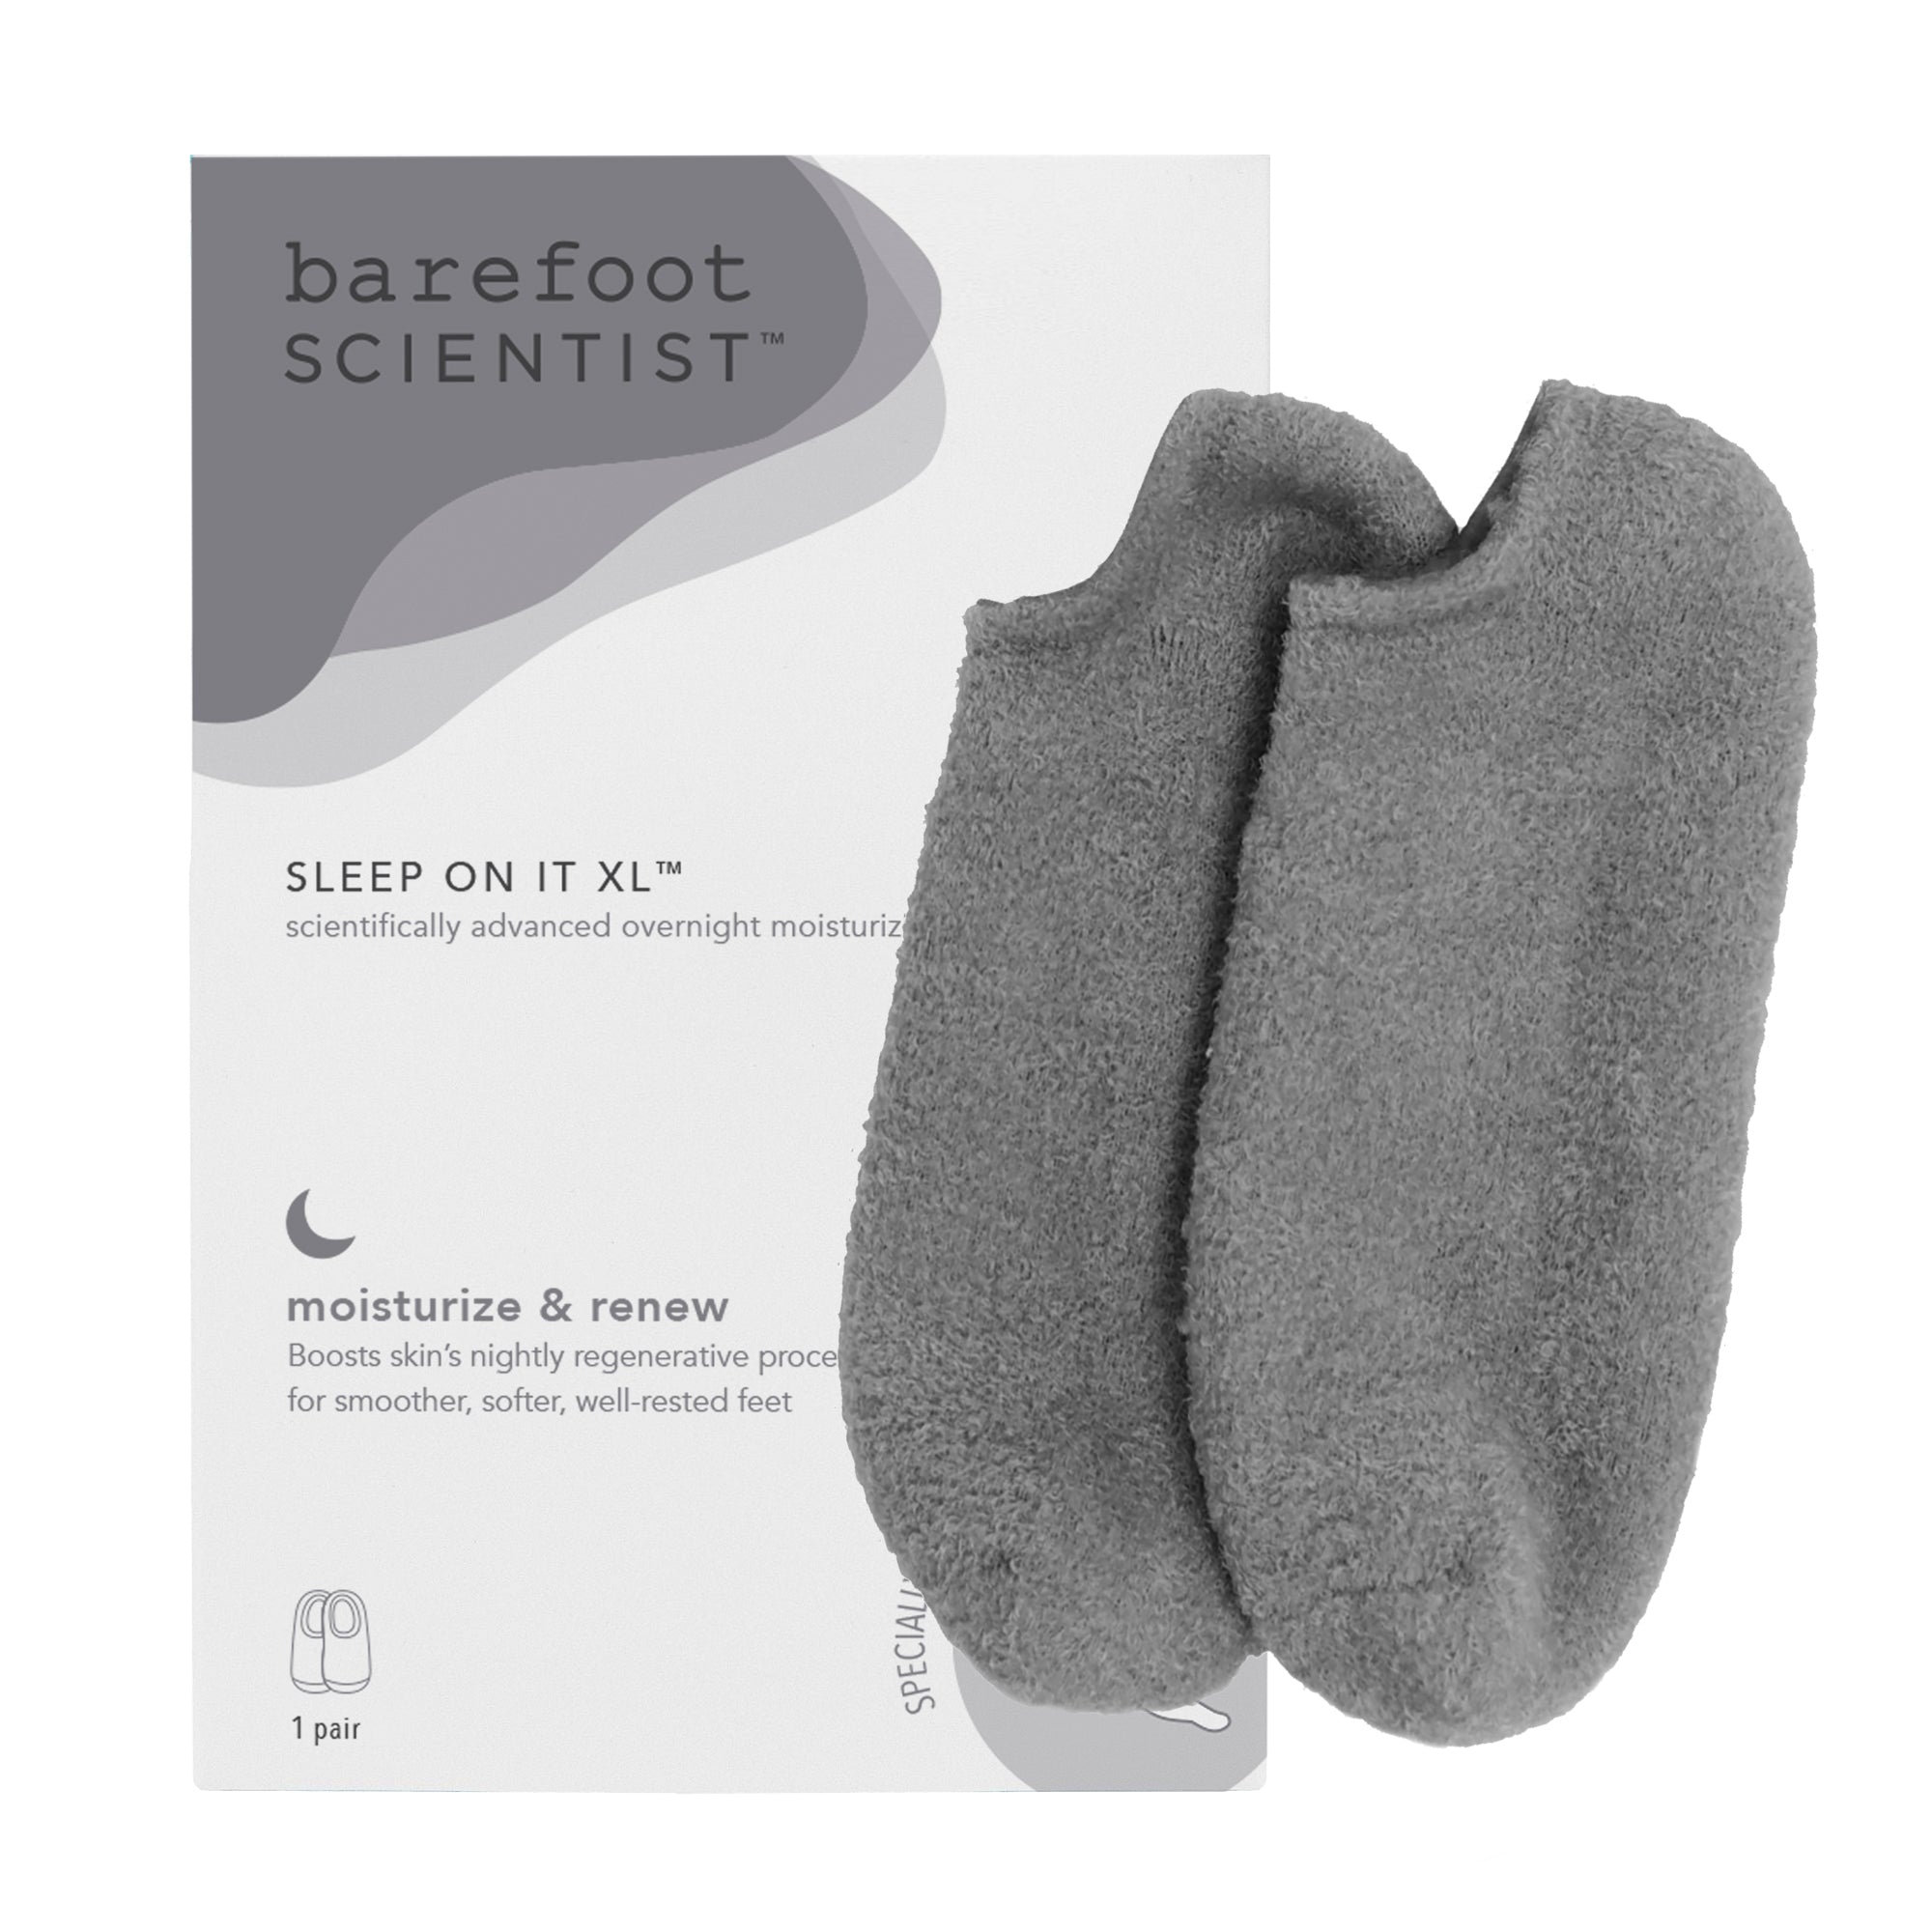 These moisturizing gel socks from add-ons are freaking awesome